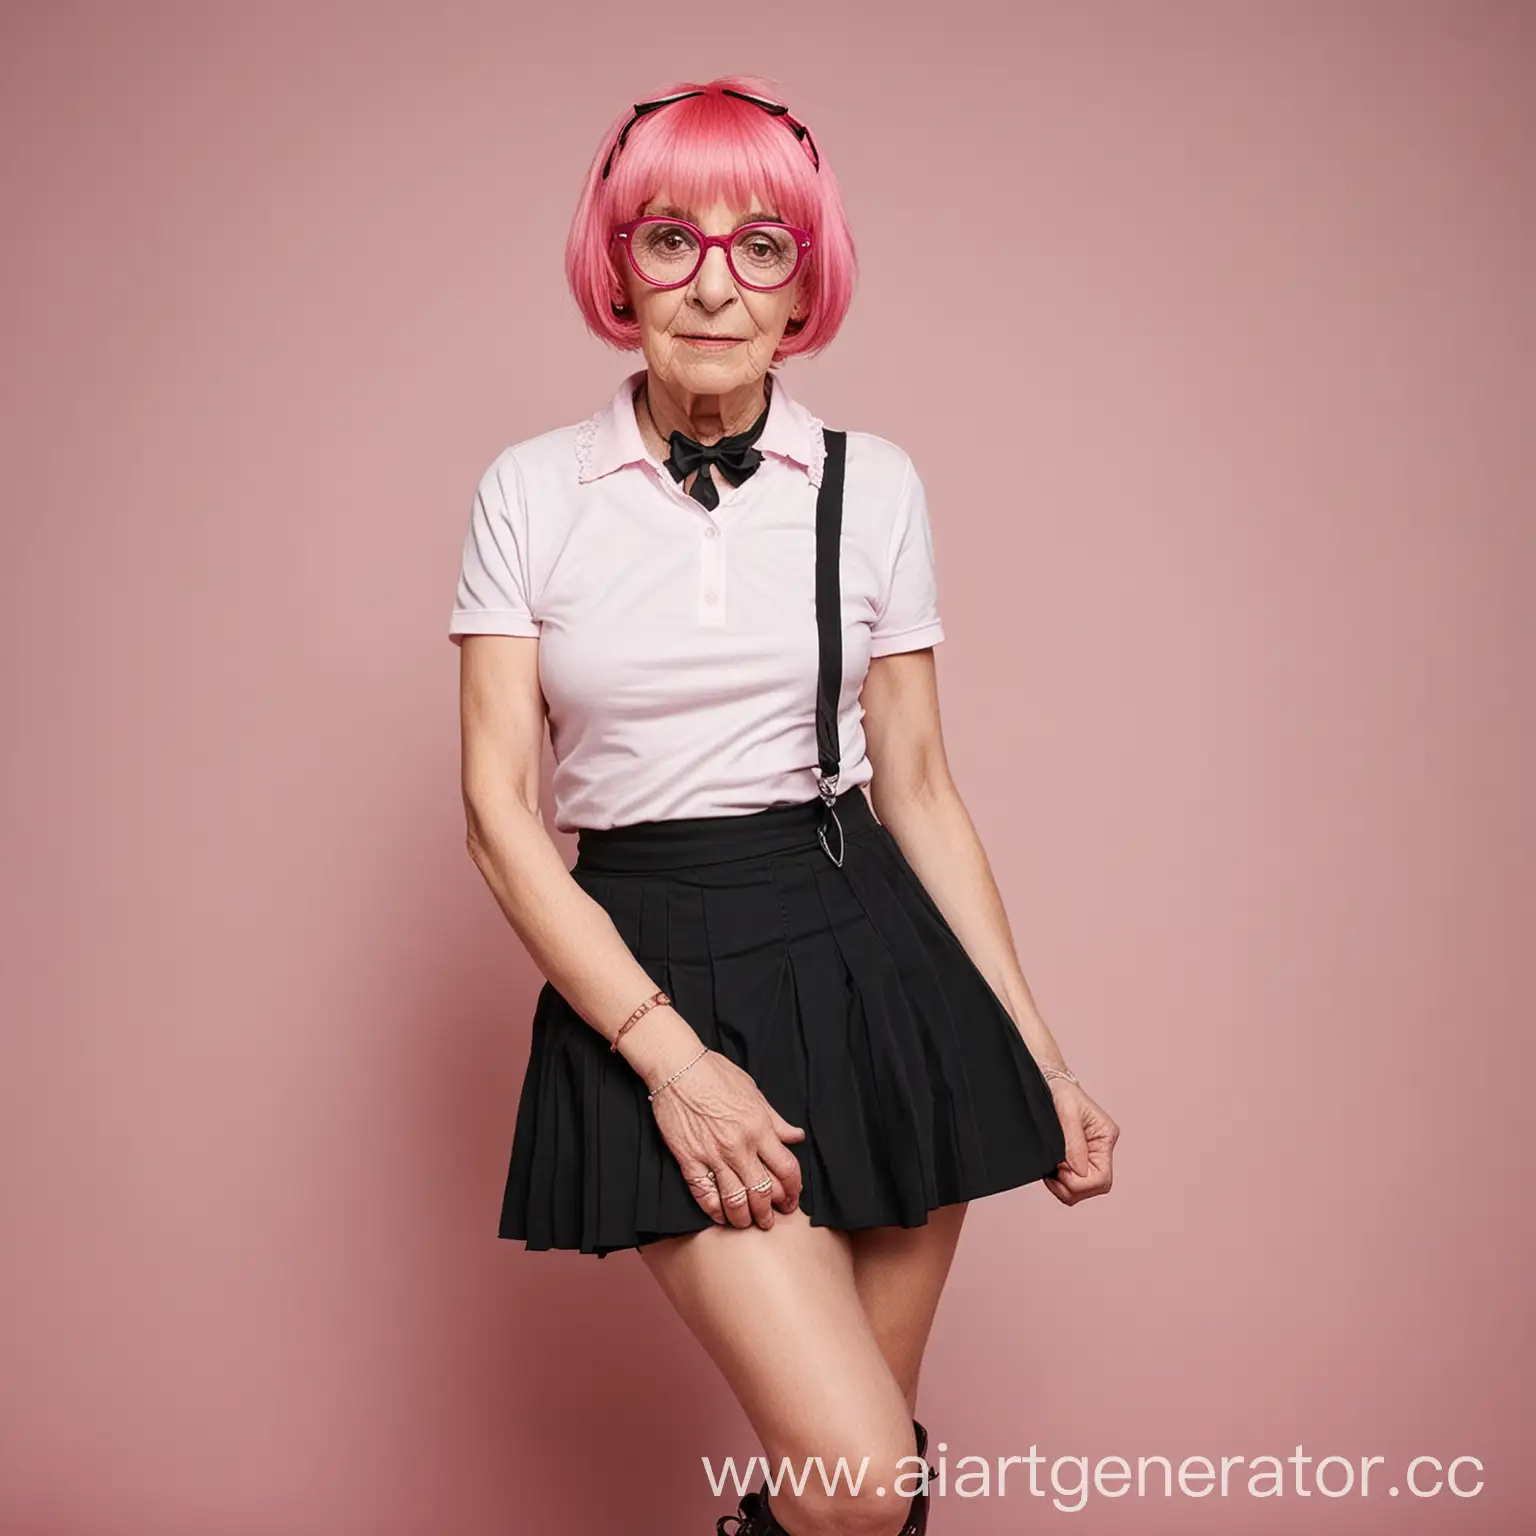 Emo-Style-Elderly-Woman-with-Pink-Glasses-and-Rose-Hair